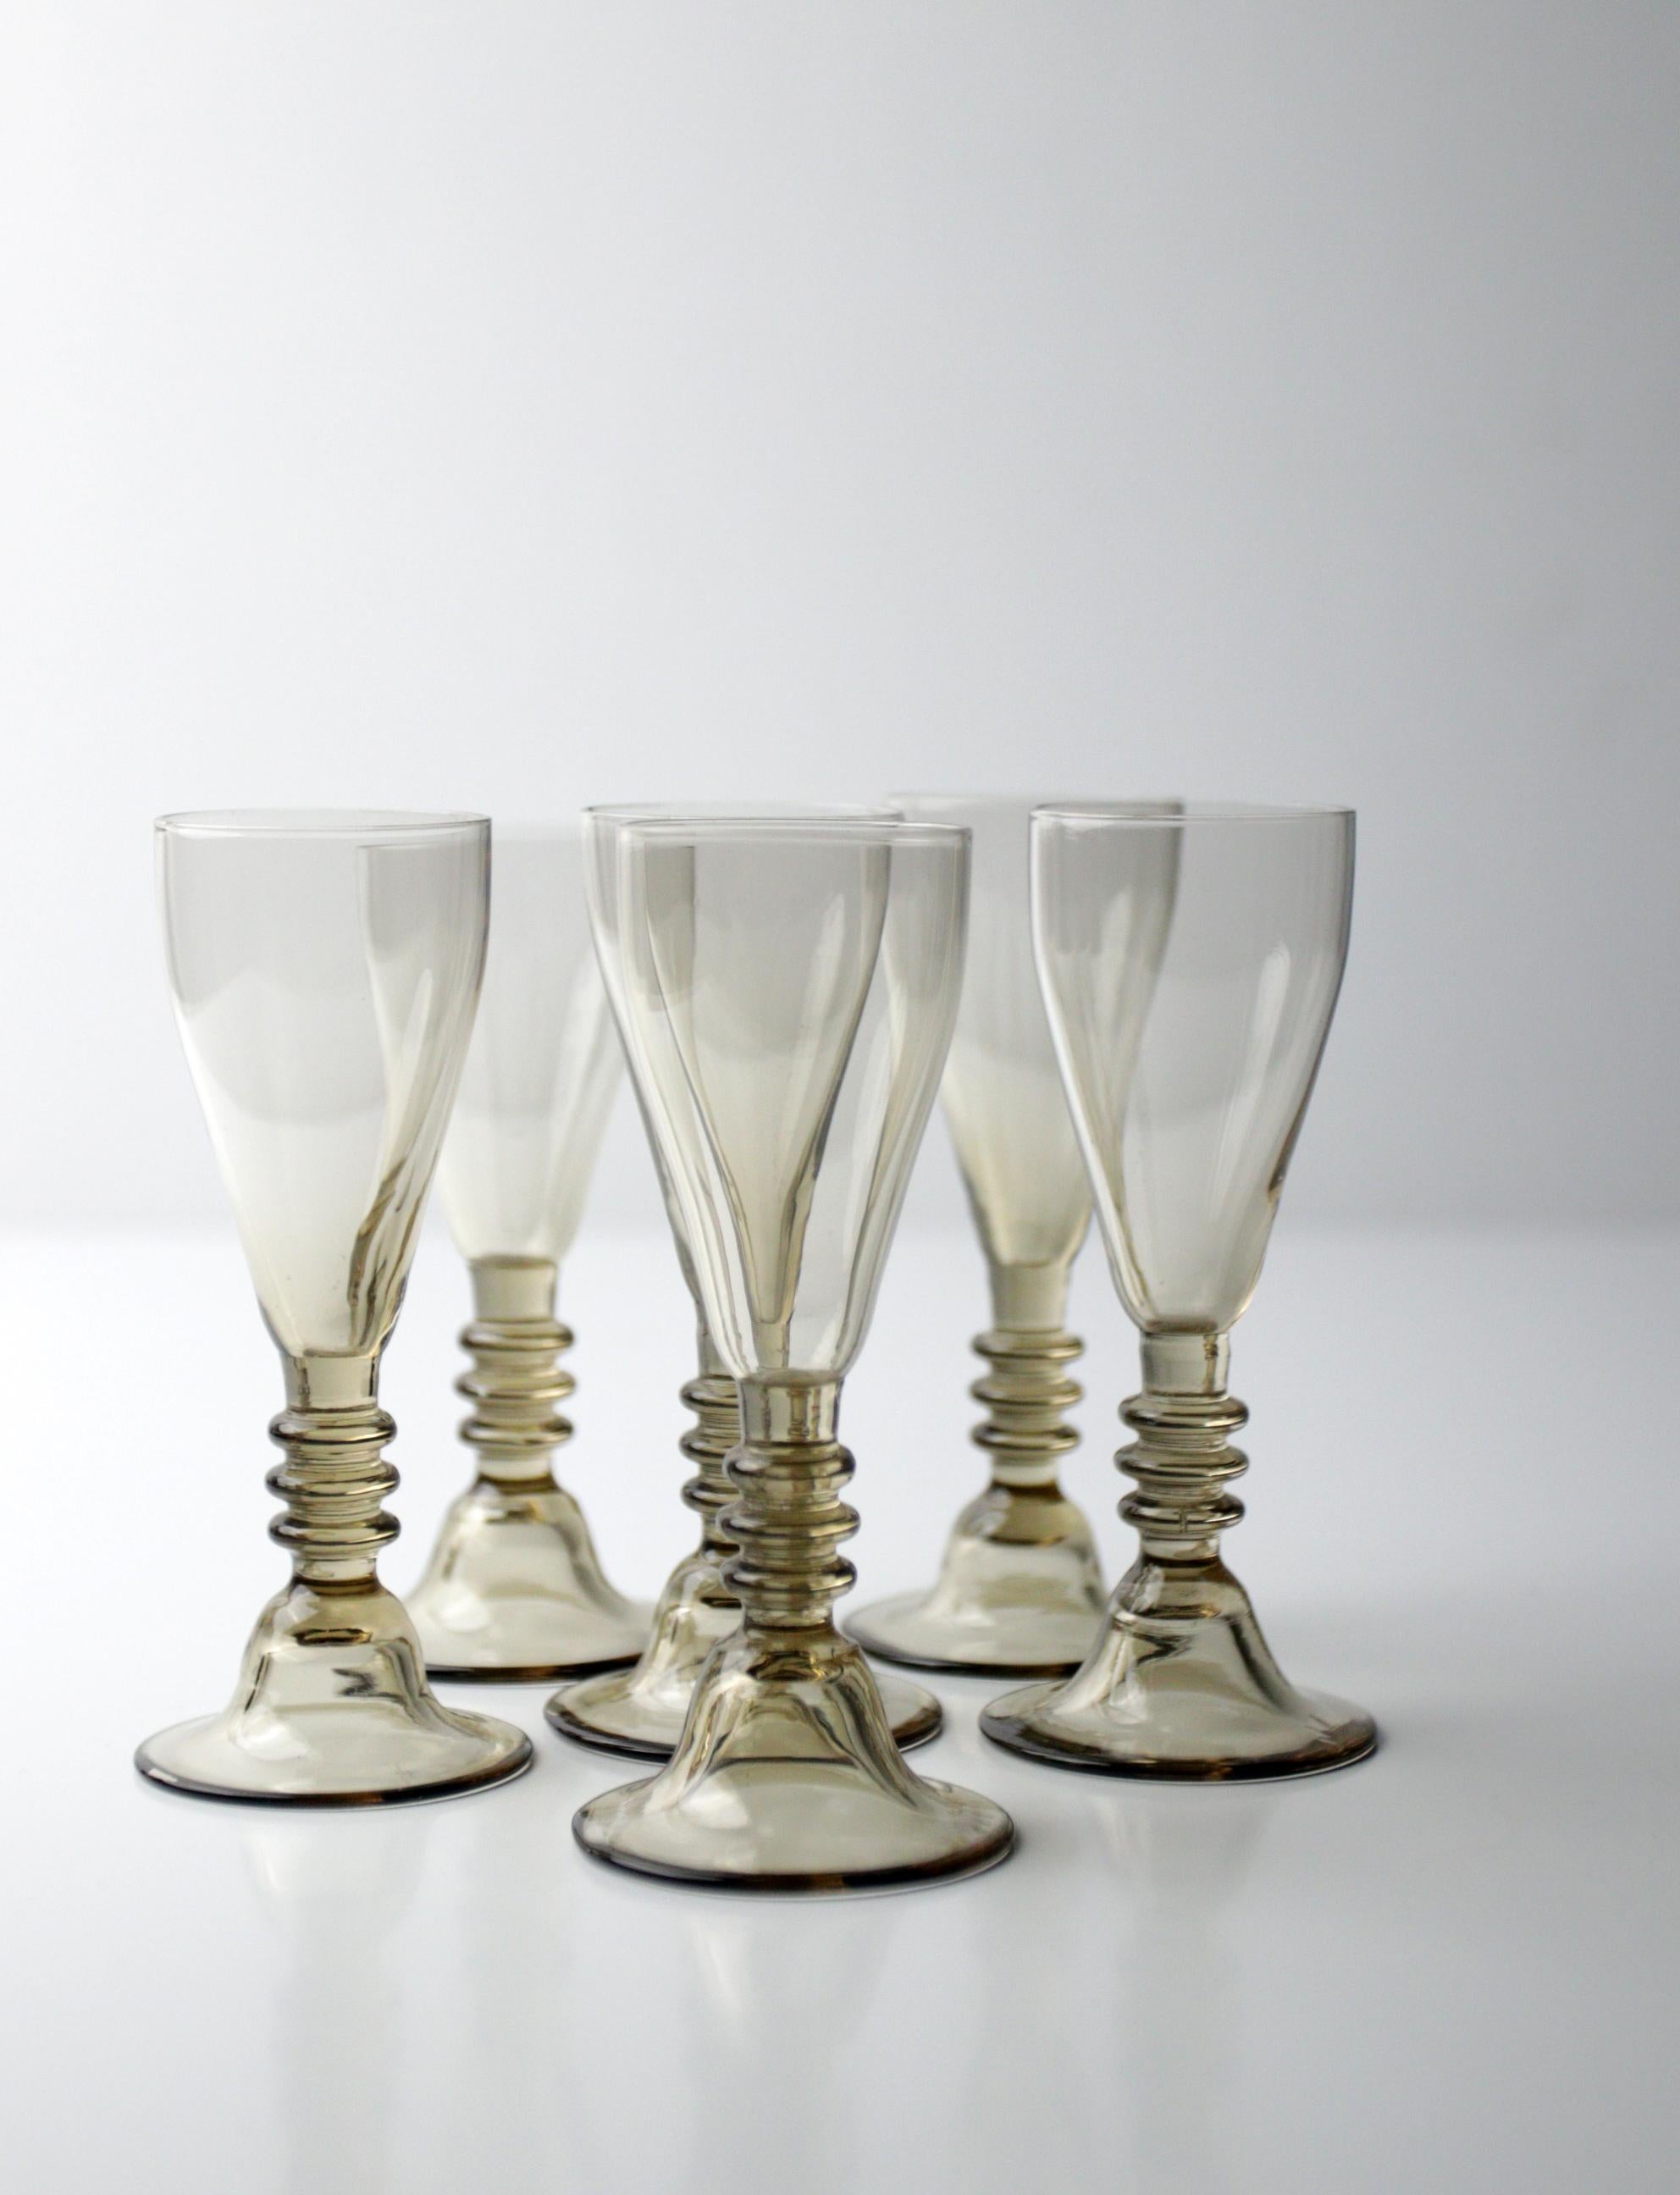 Beautiful Little liqueur glasses (ca 10.5cm high) designed by Willem Jacob Roozendaal in 1932 for Kristalunie Maastricht.
The set contains 6 pieces and all in a good condition with little traces of use, one has a mini chip of the rim (see the